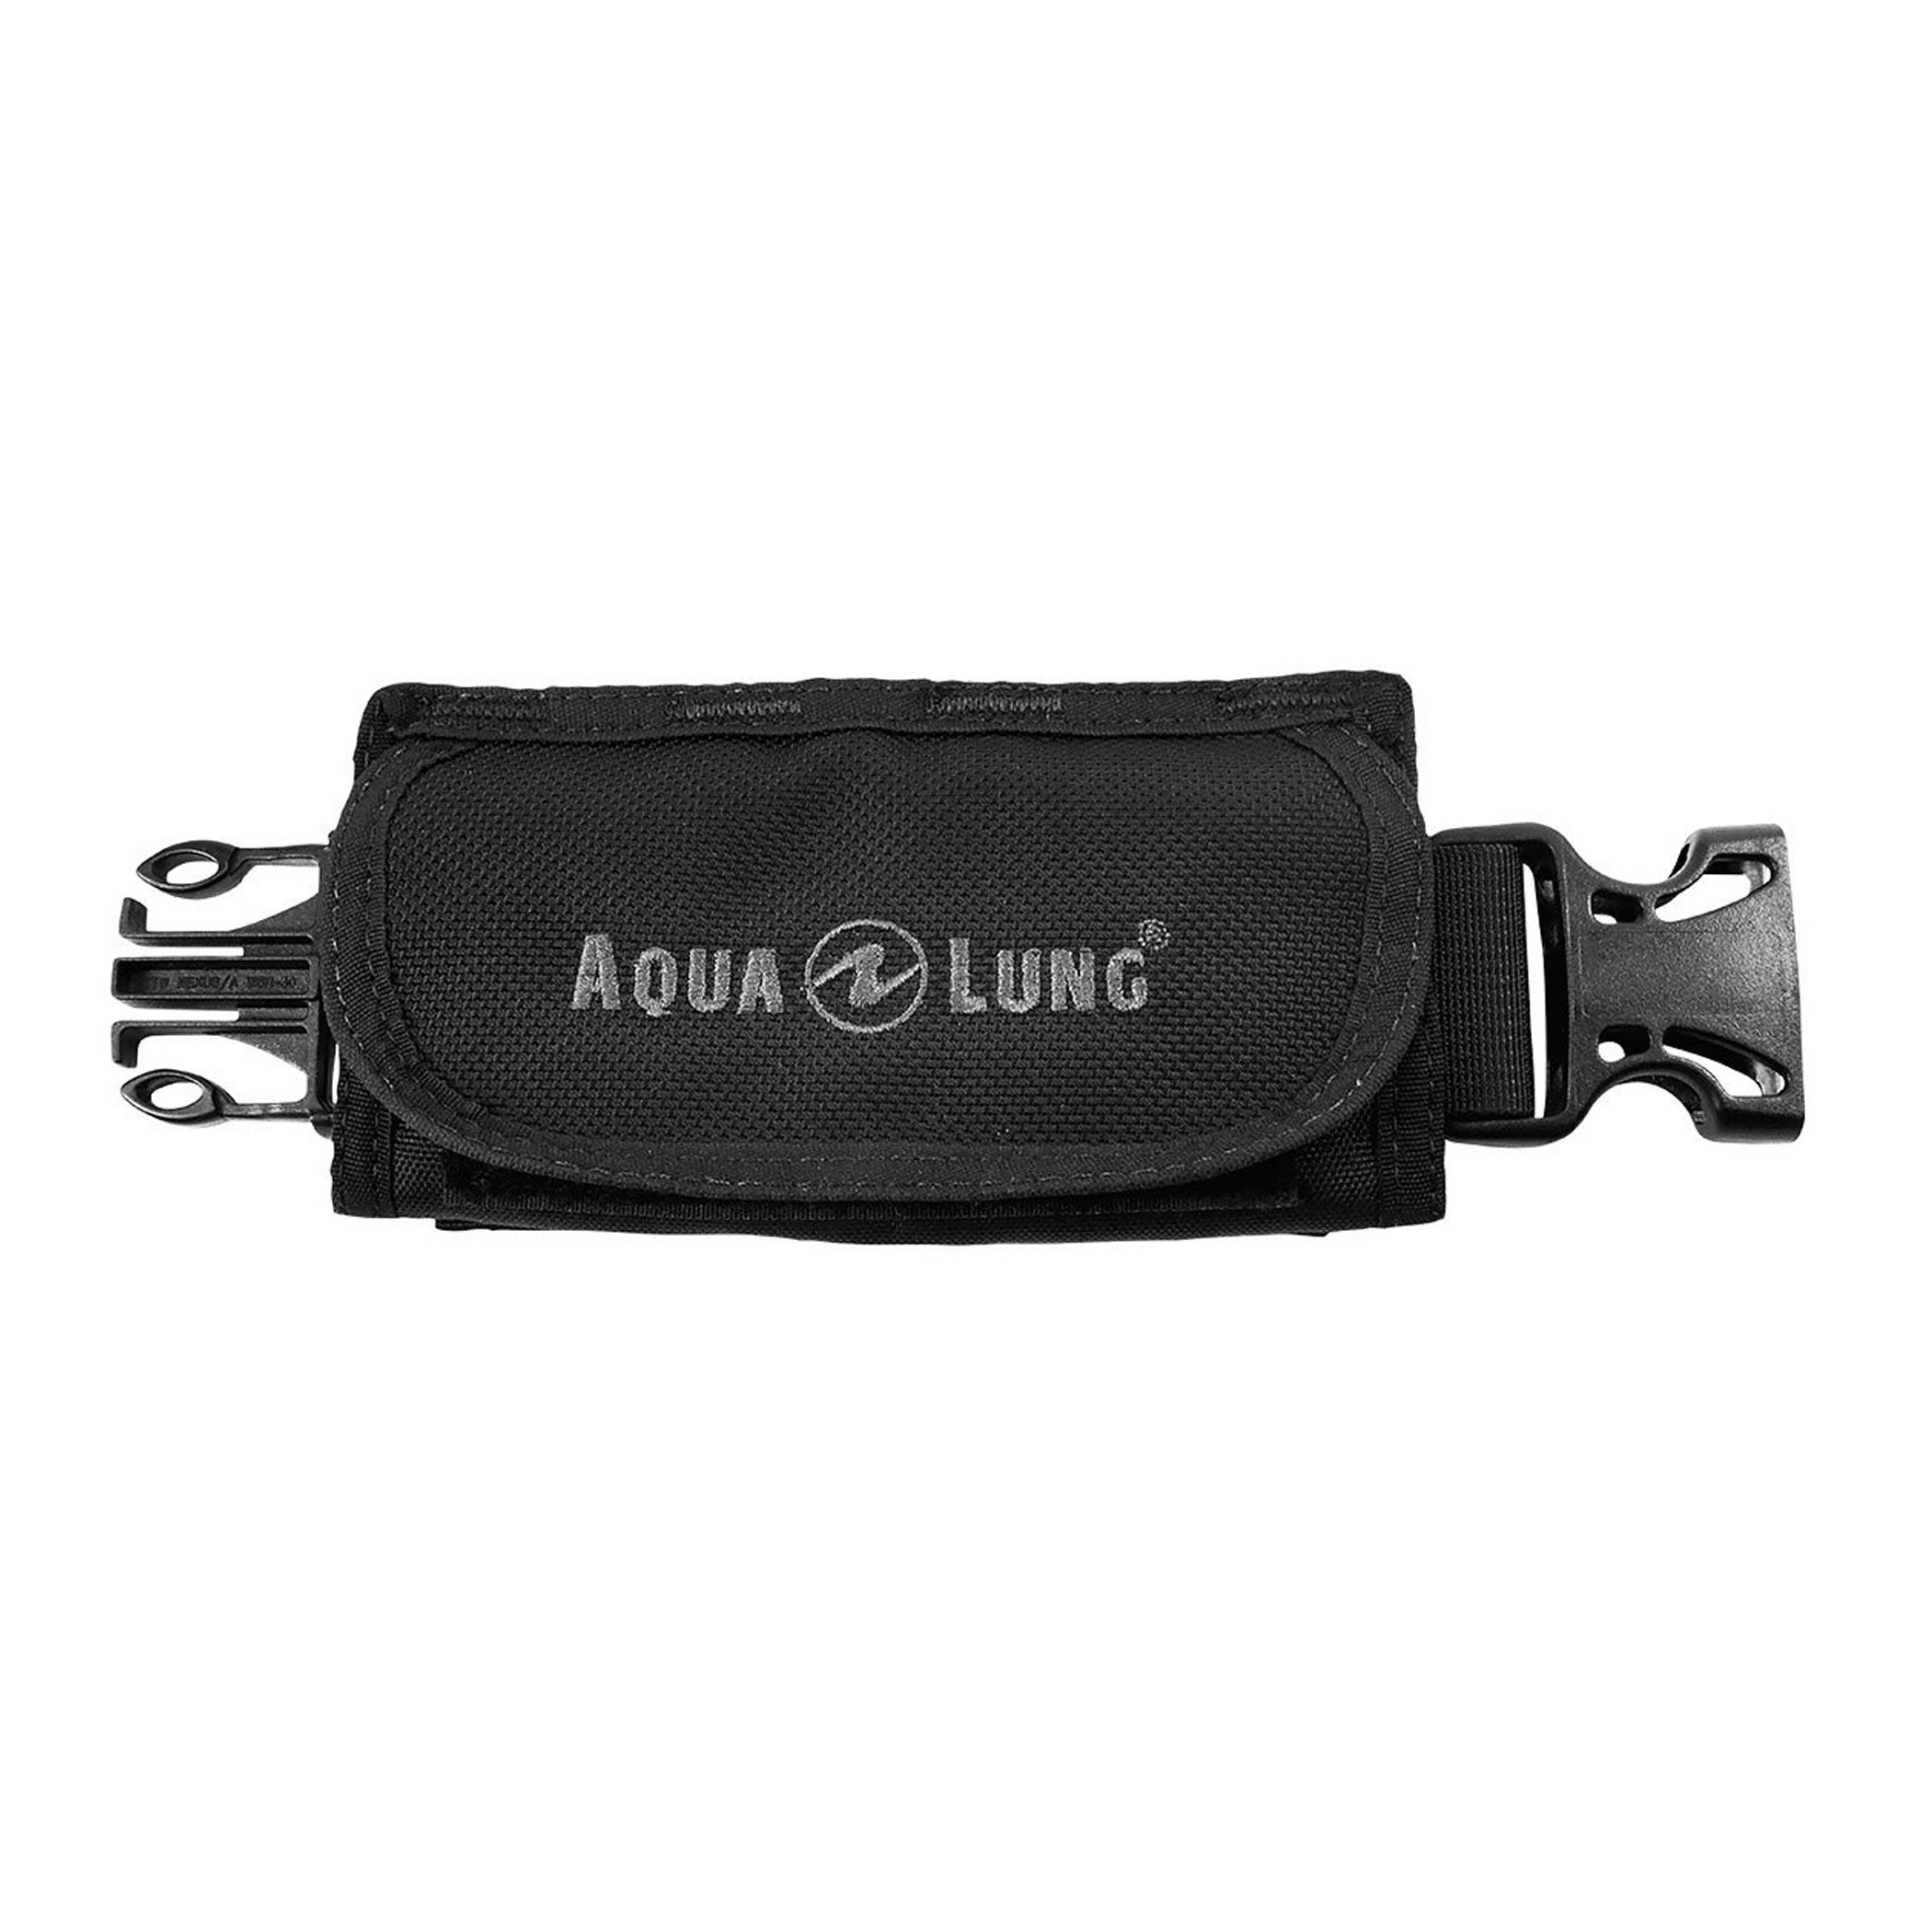 Aqualung 1.5 Inch Waistband Extender With Pocket | Dive Gear Australia